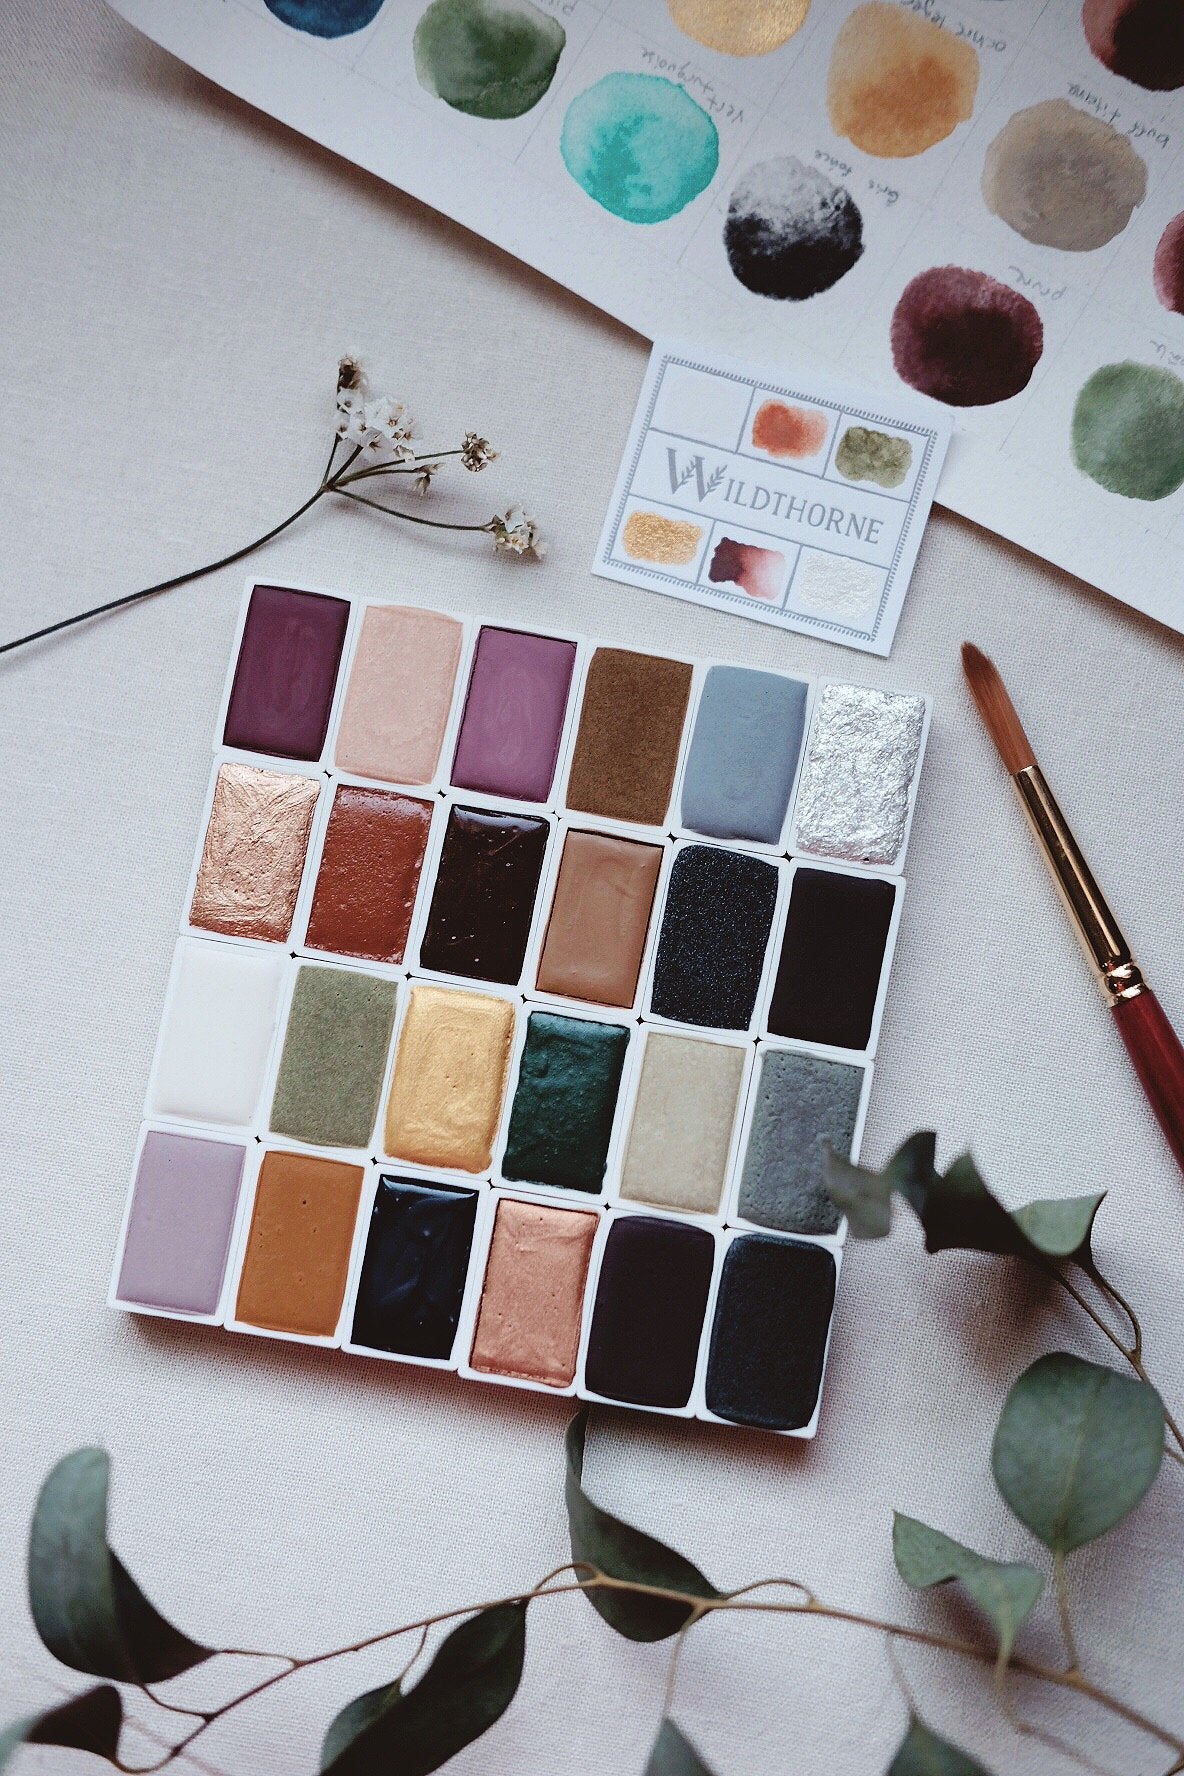 Full pan - Limited edition Mineral watercolors